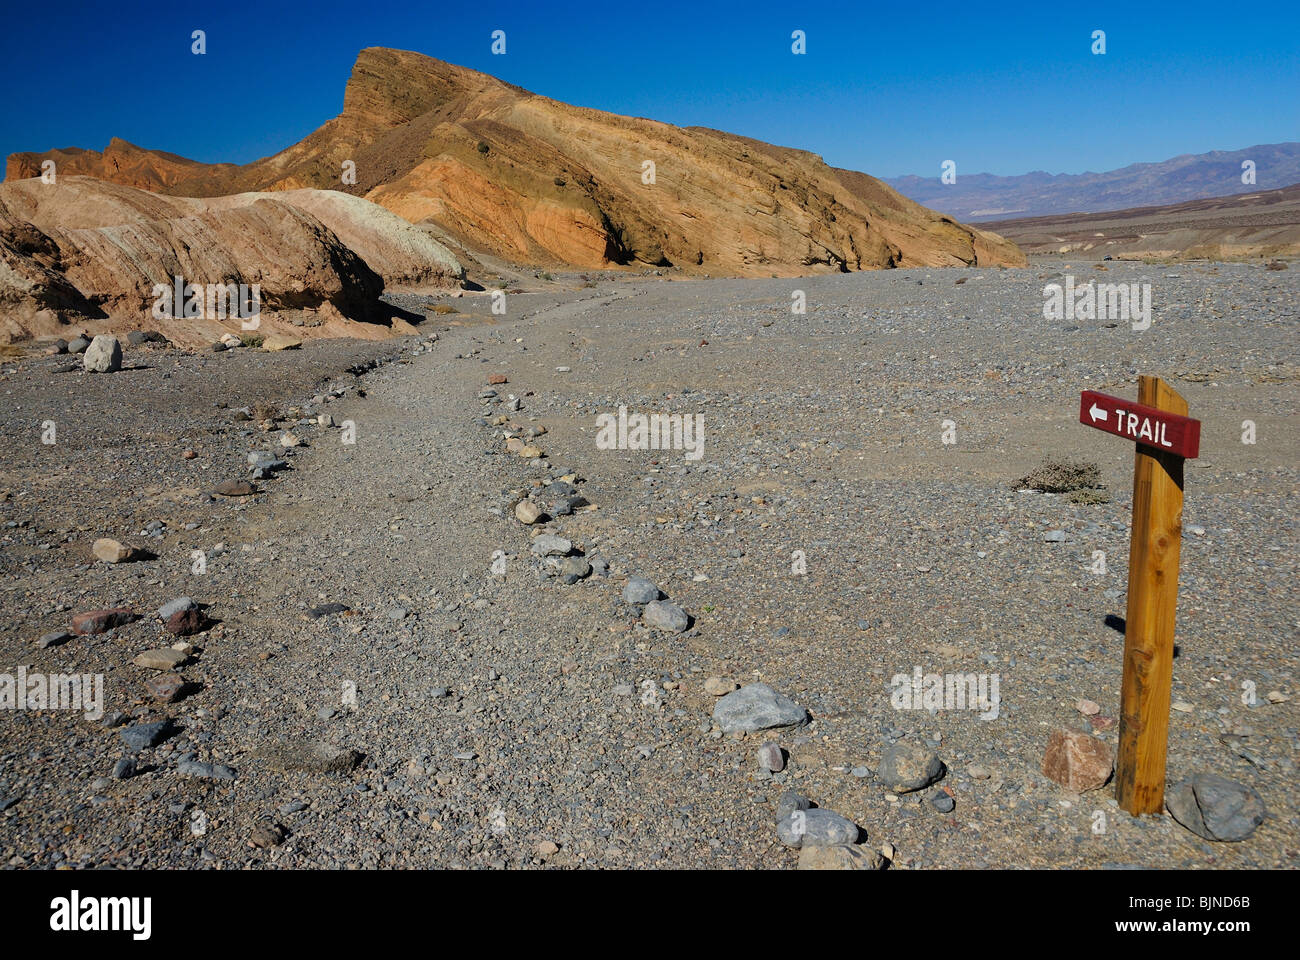 Wooden sign showing a trail in Death Valley, California state Stock Photo